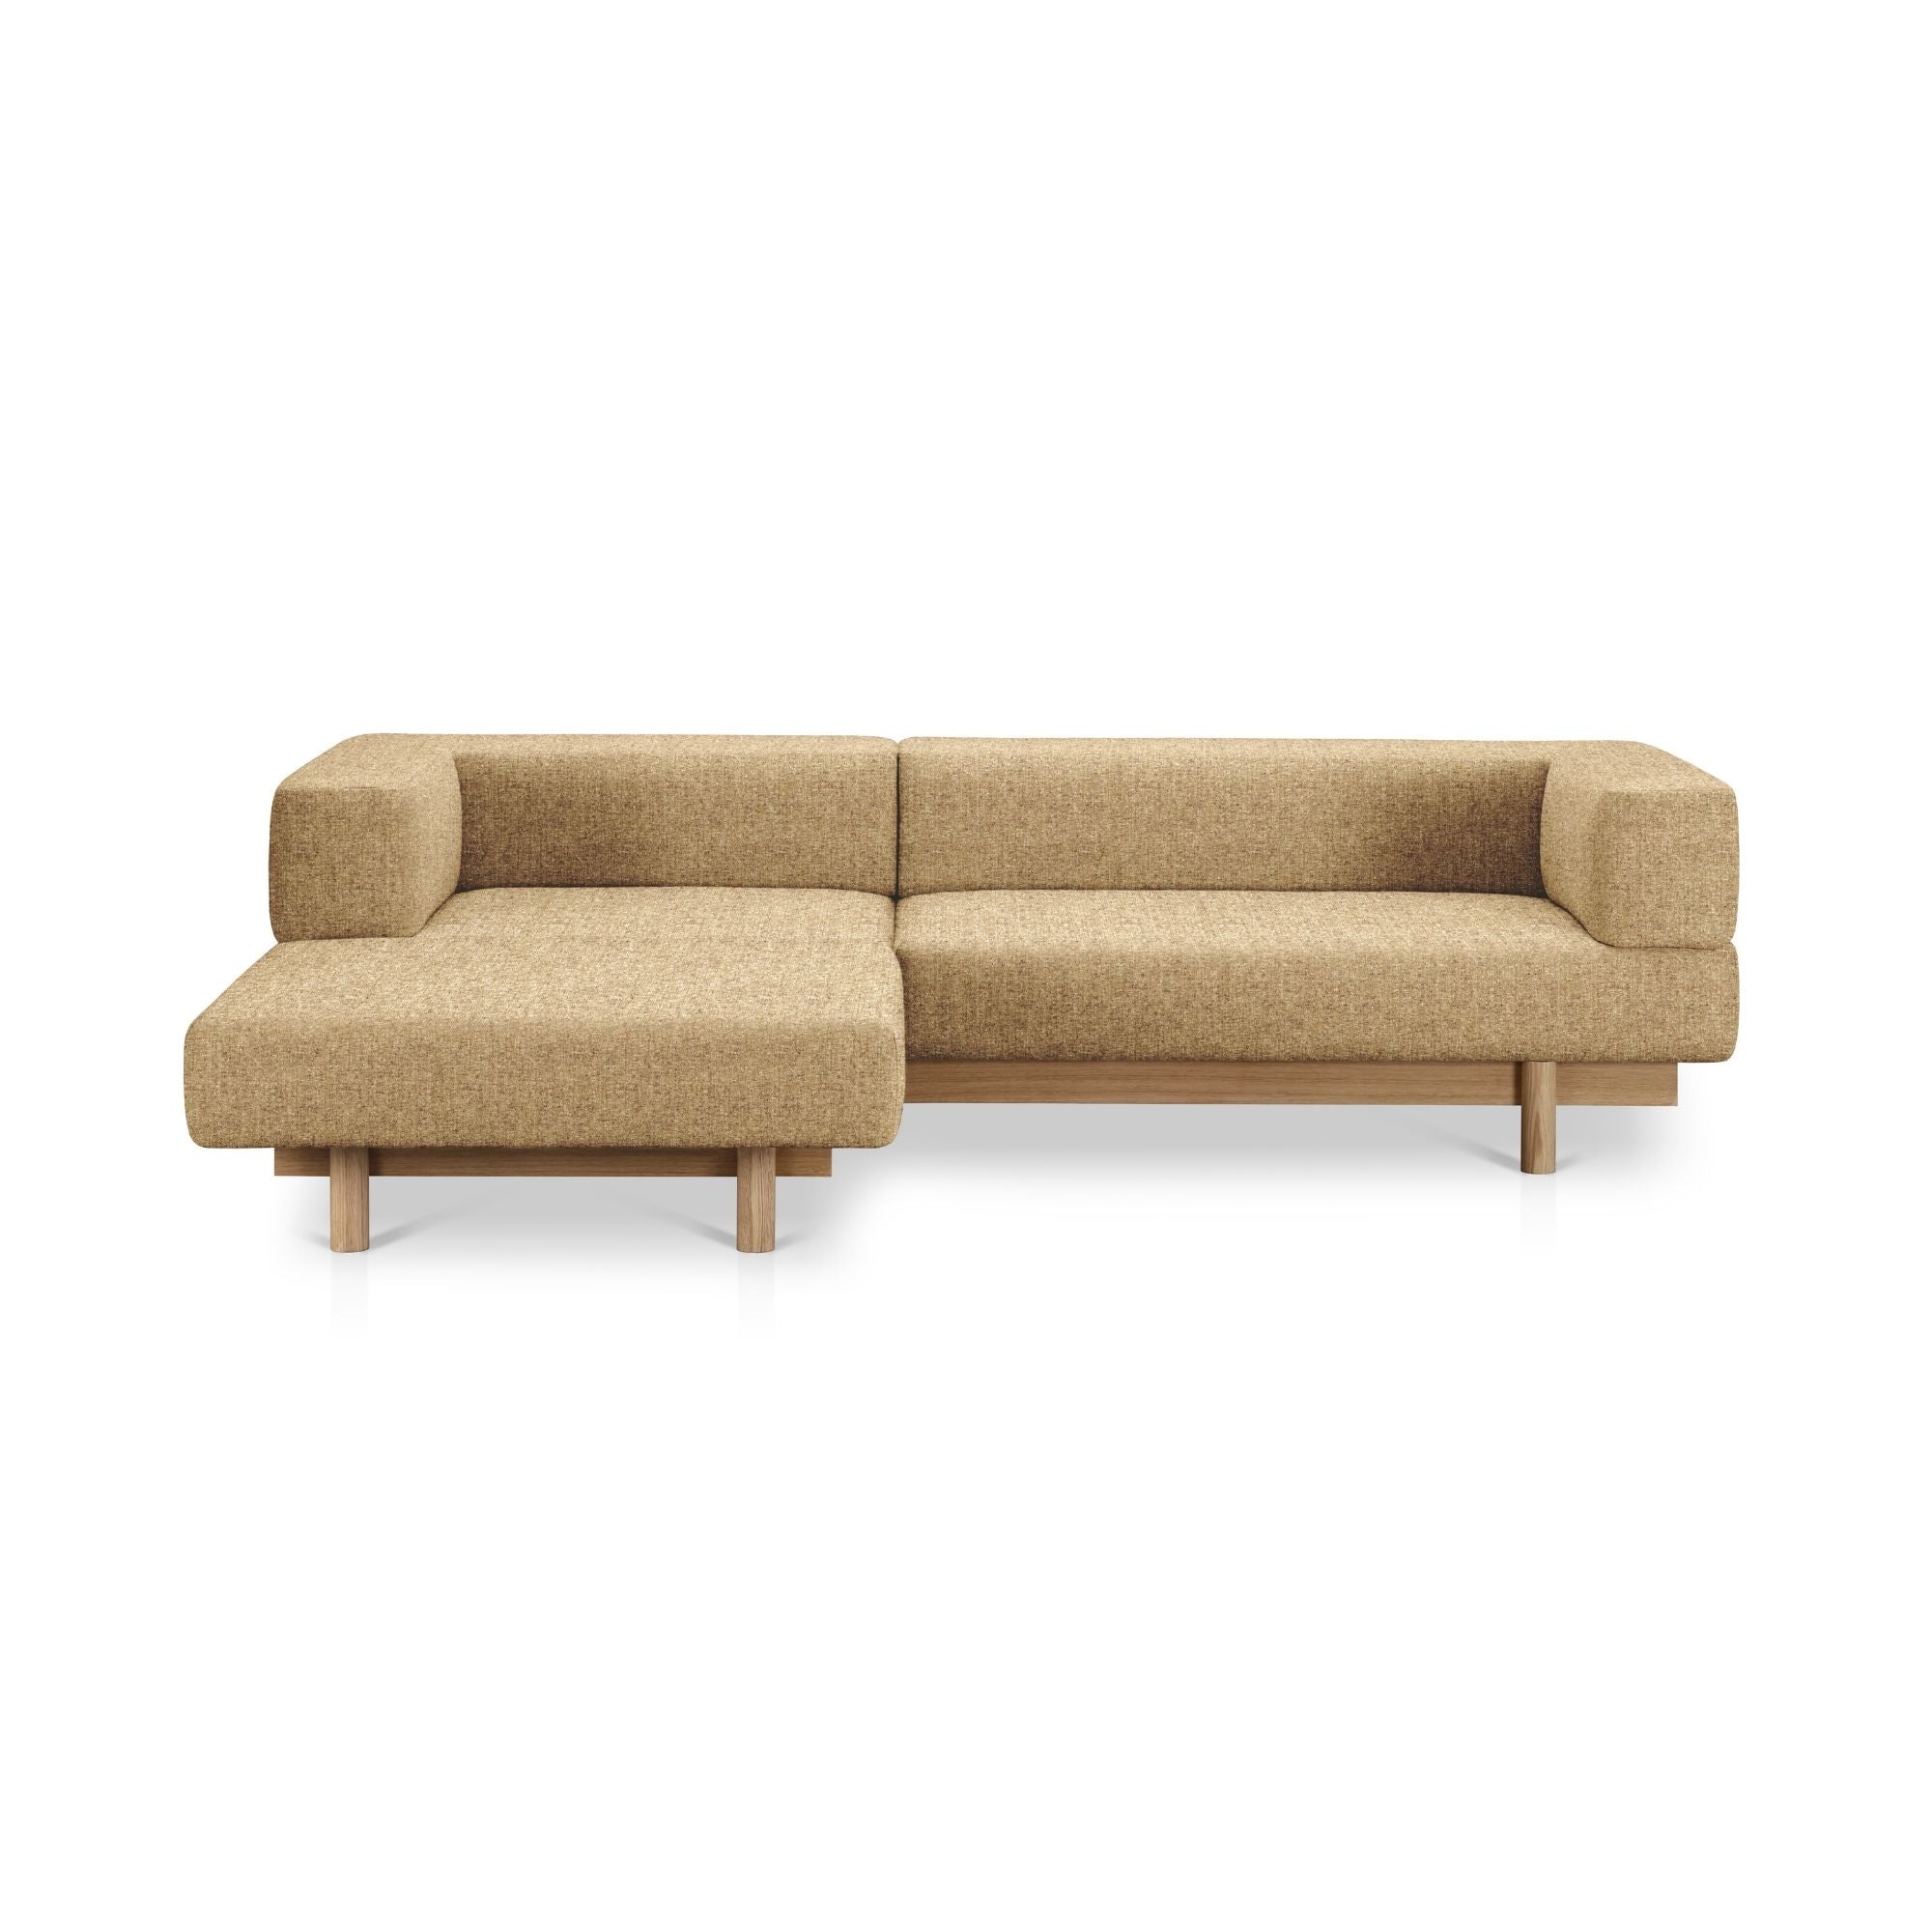 Alchemist Sofa with Chaise Lounge - THAT COOL LIVING